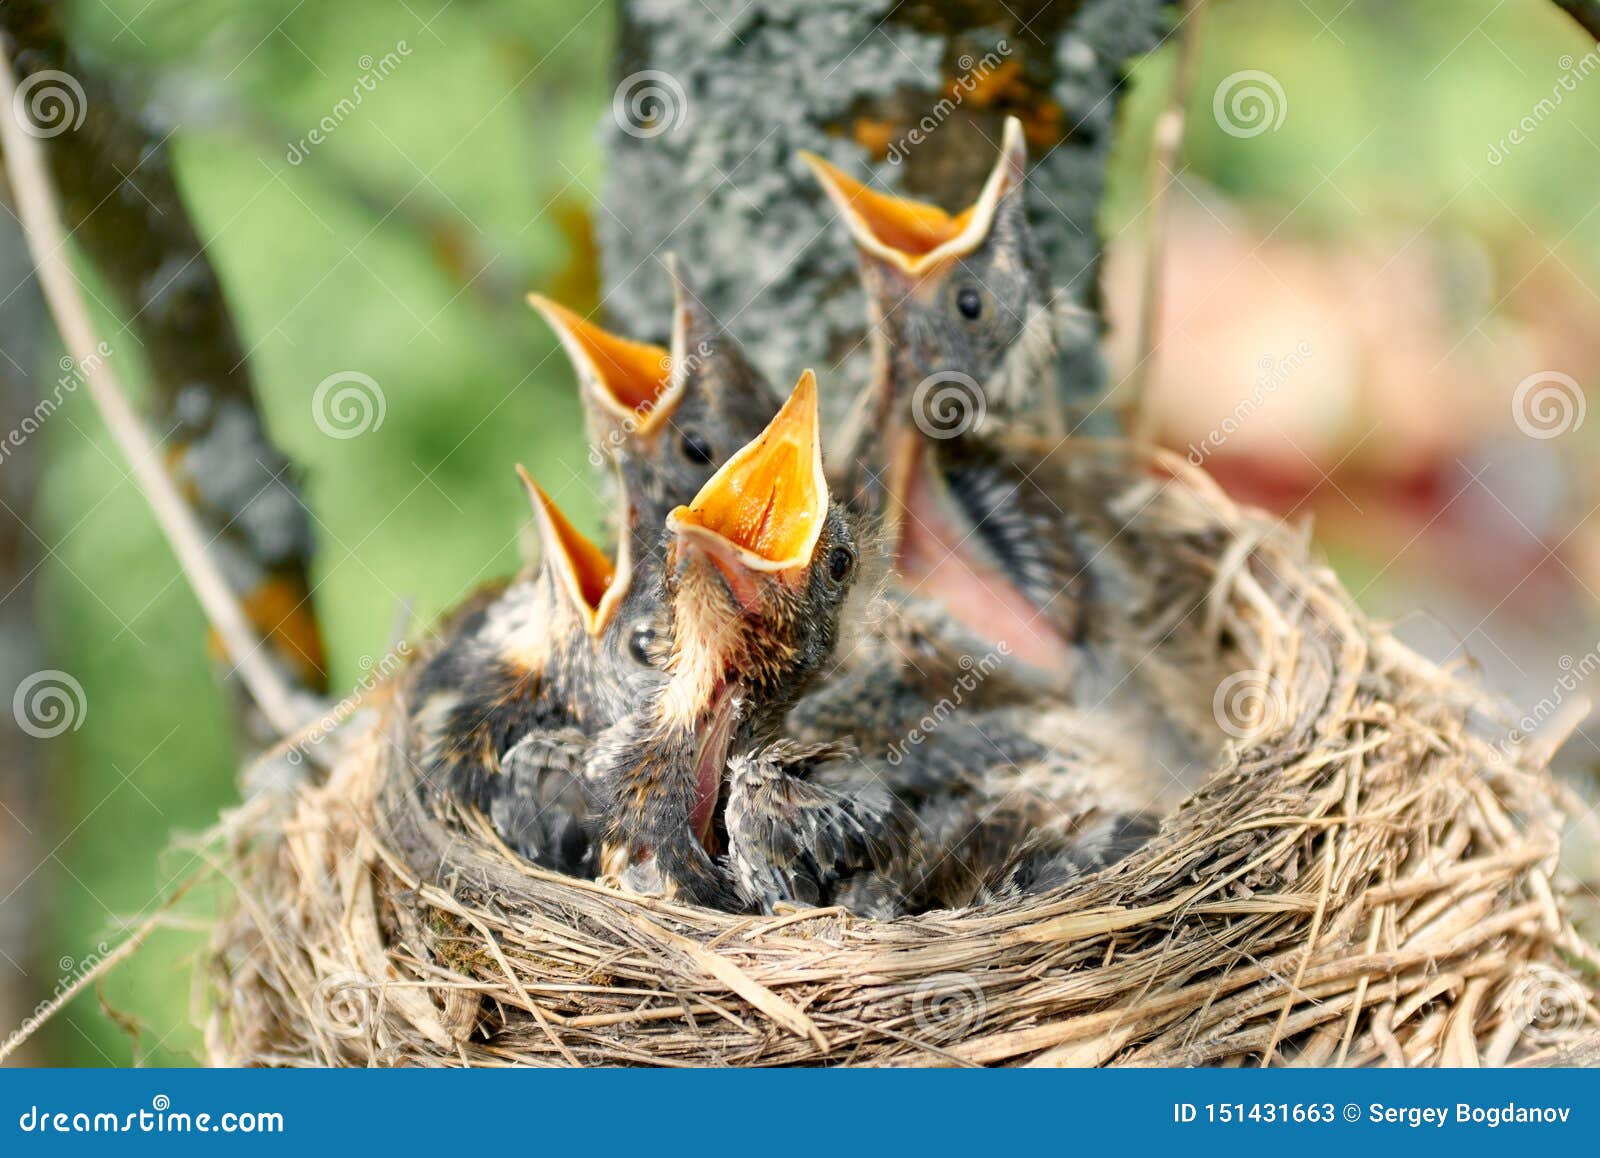 Download Baby birds in nest stock image. Image of outdoor, mouth ...